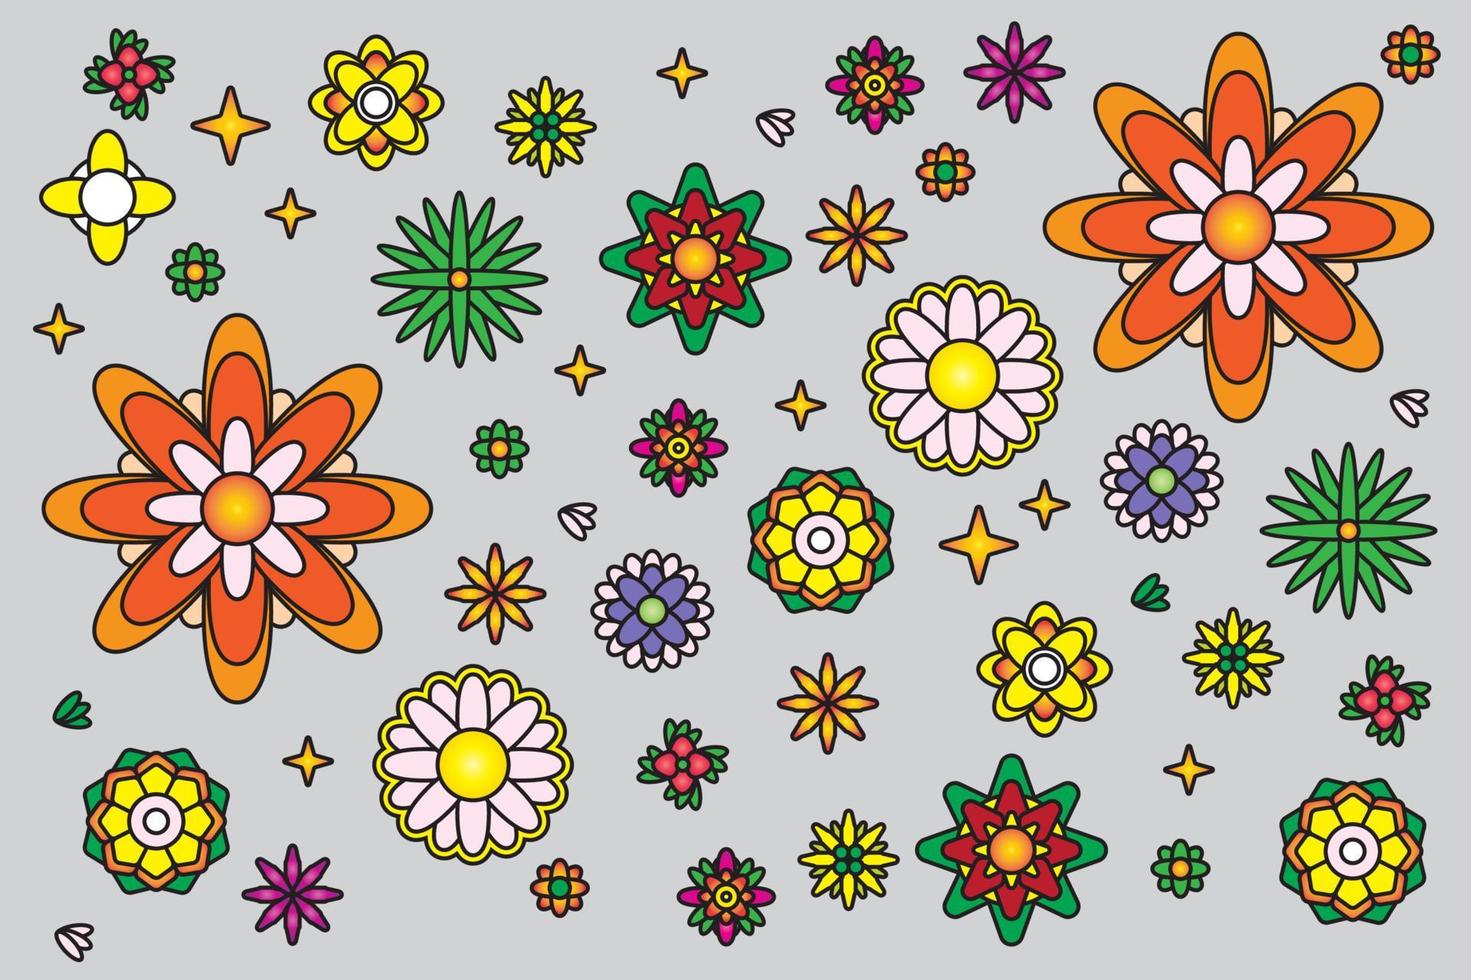 Groovy Flower Sticker pack in trendy retro psychedelic cartoon vector style